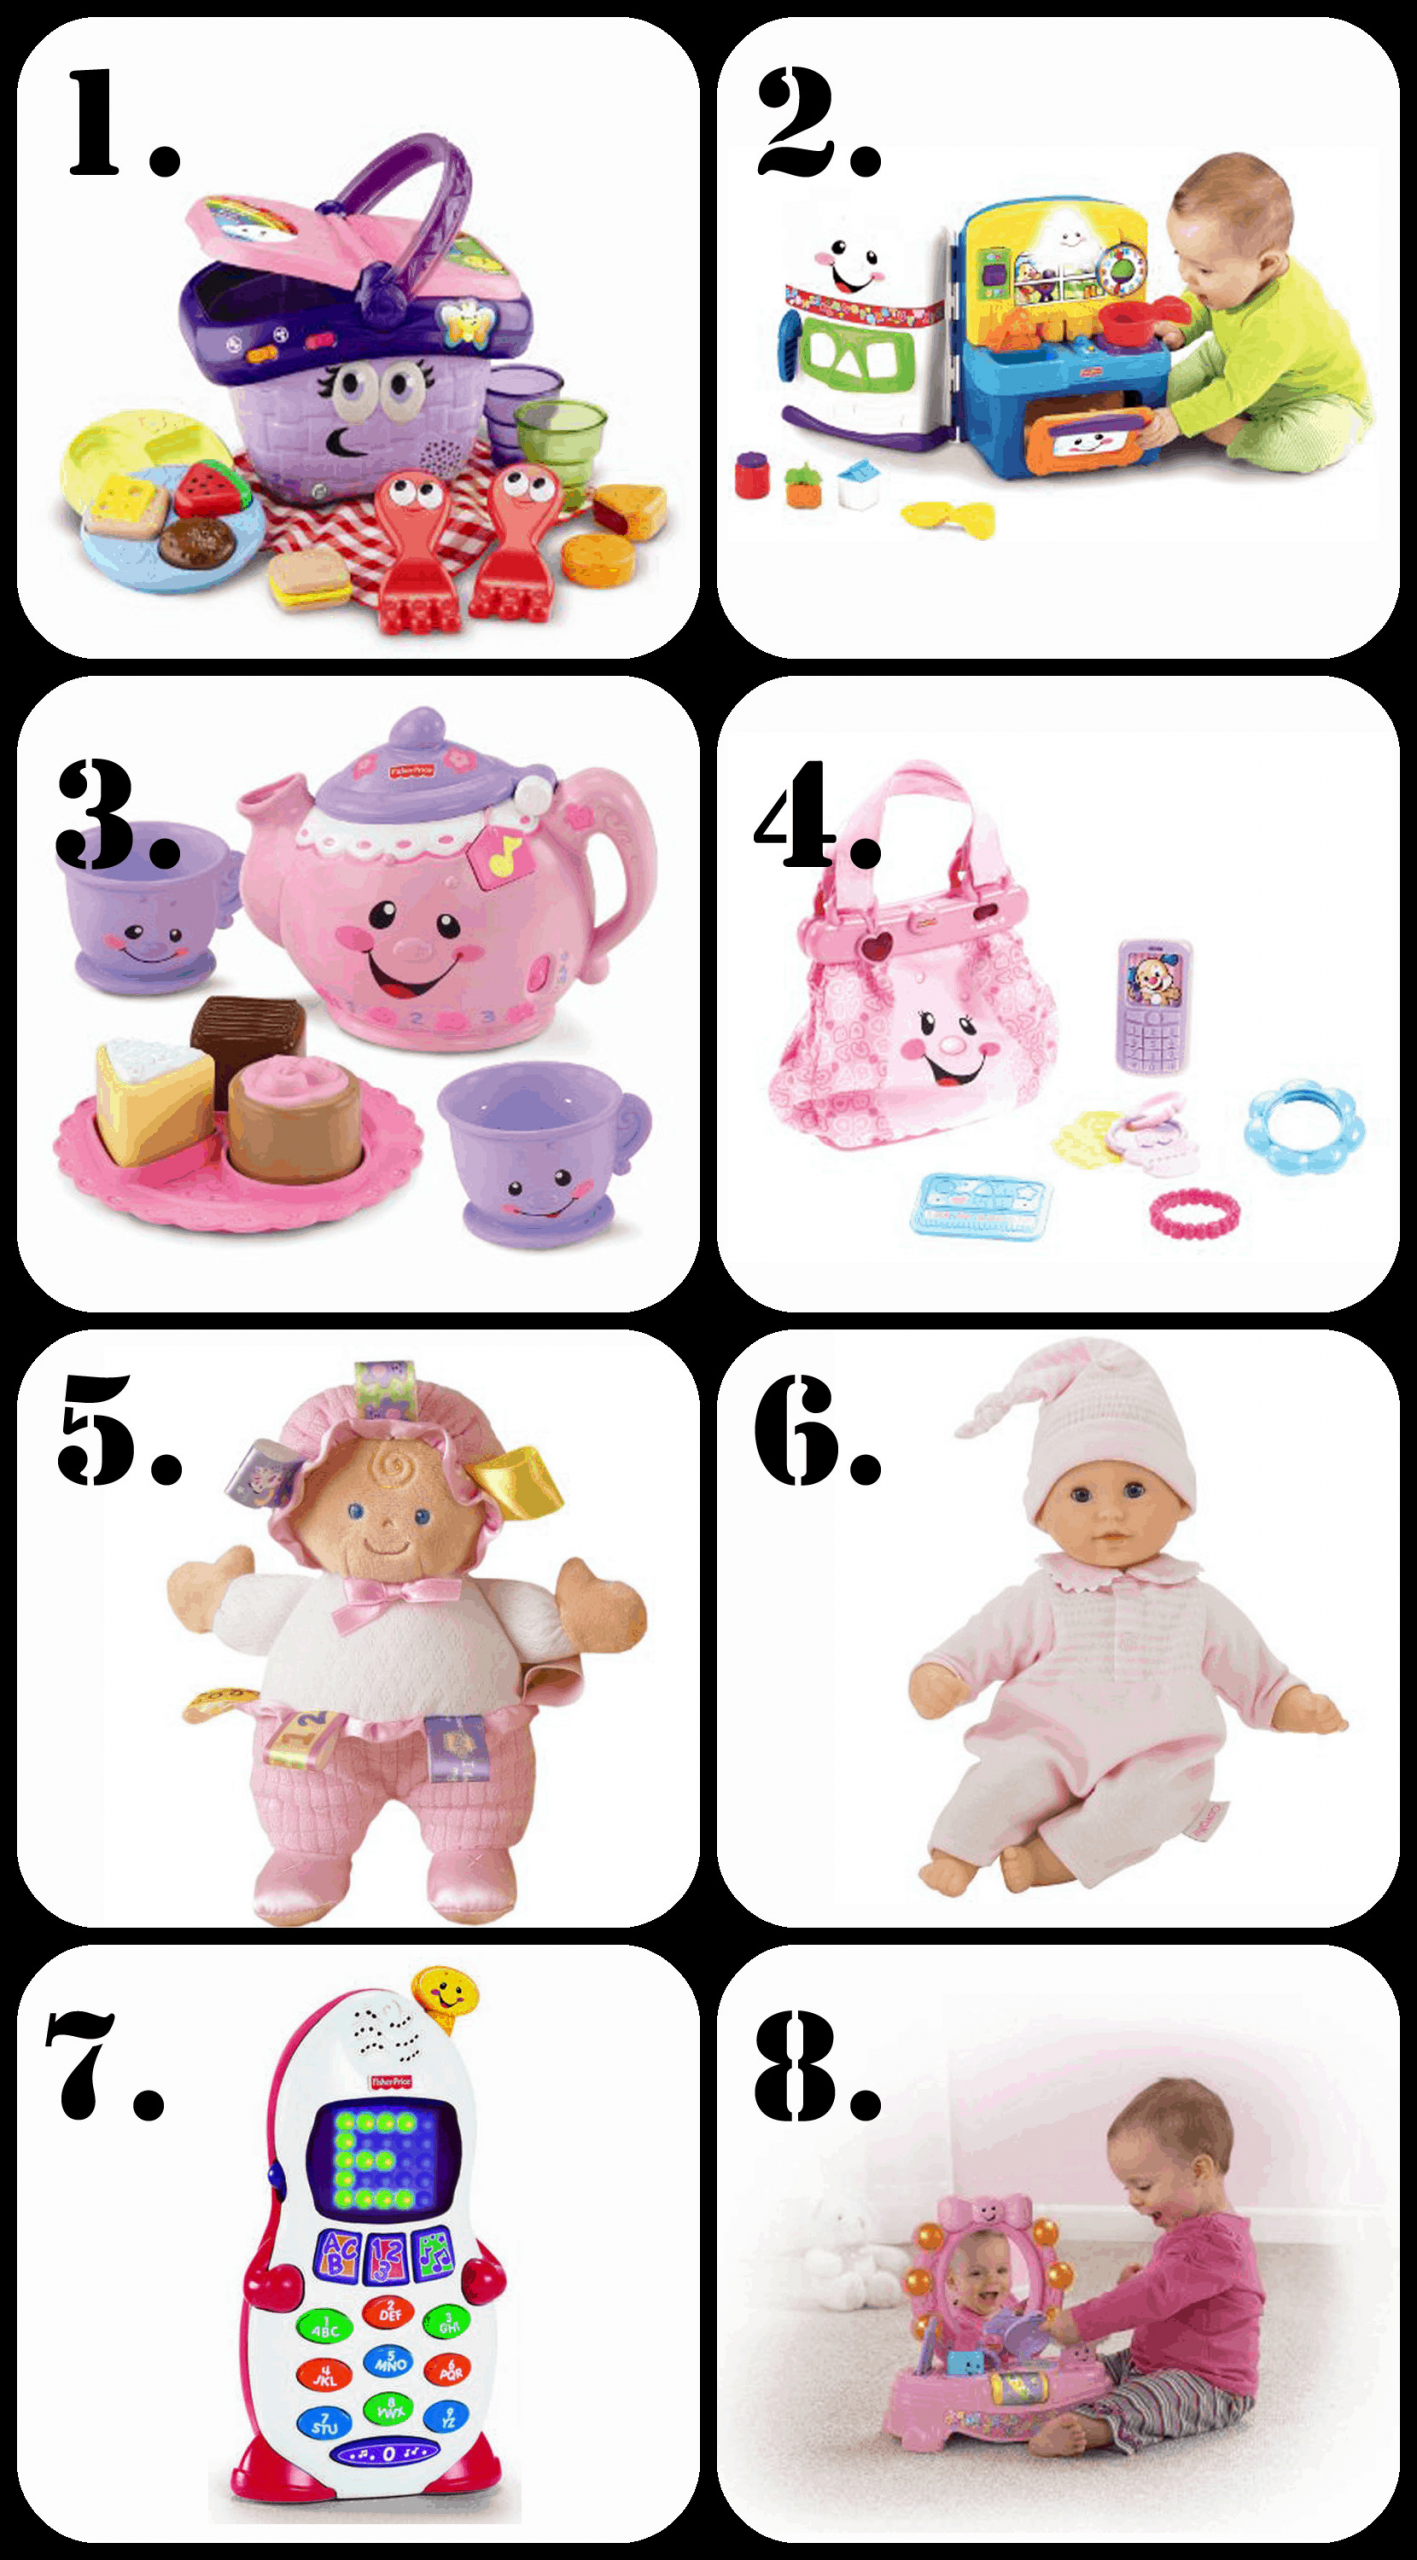 Birthday Gift Ideas For One Year Old Girl
 The Ultimate List of Gift Ideas for a 1 Year Old Girl